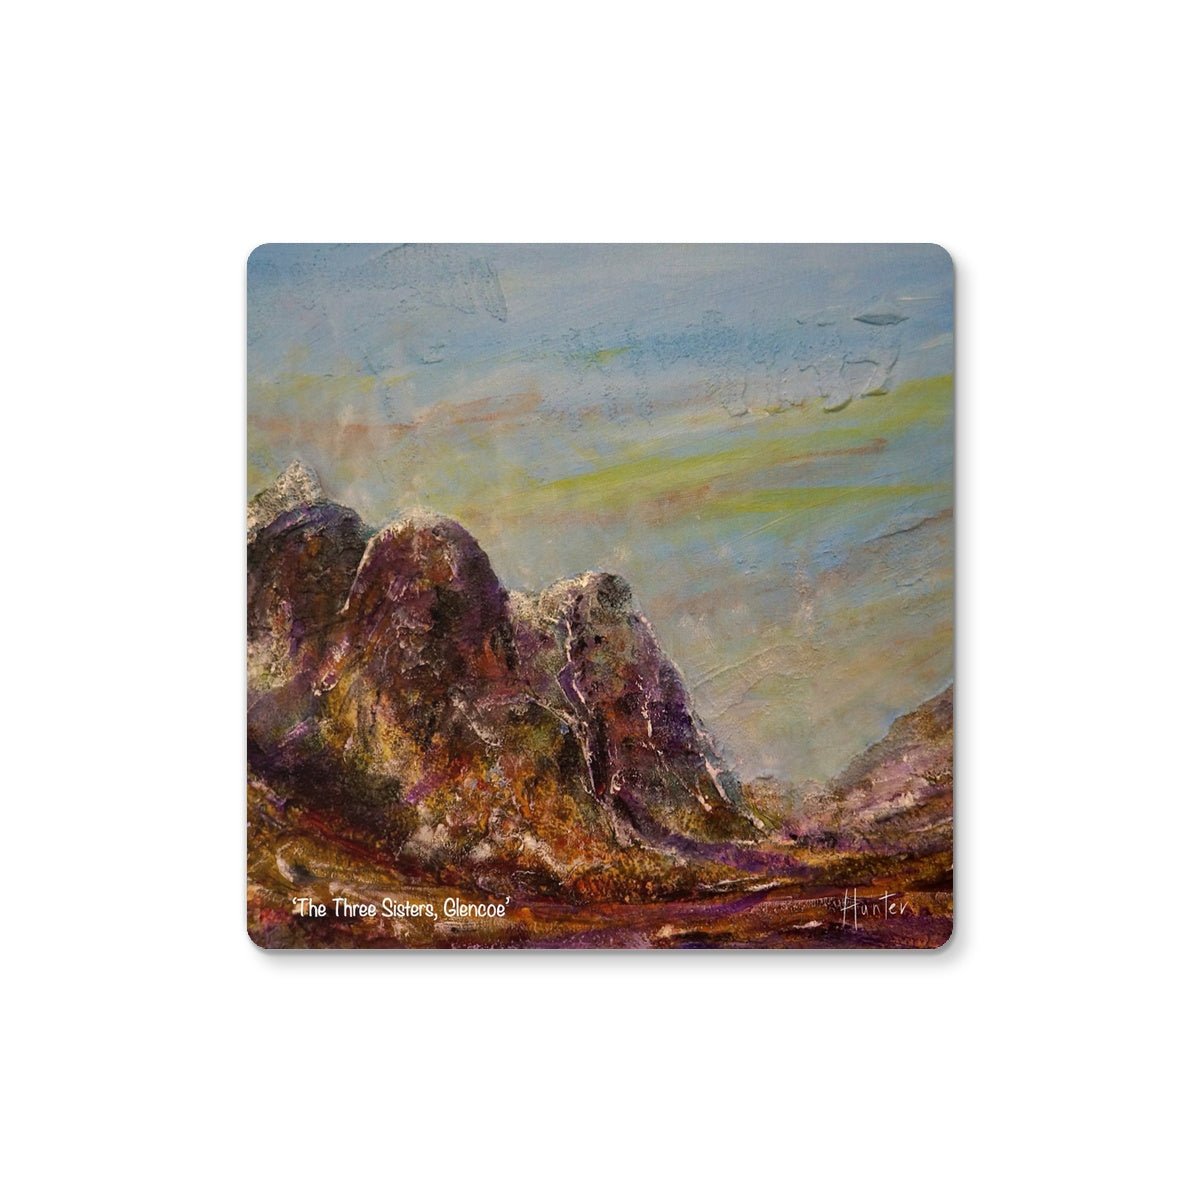 Three Sisters Glencoe Art Gifts Coaster-Coasters-Glencoe Art Gallery-4 Coasters-Paintings, Prints, Homeware, Art Gifts From Scotland By Scottish Artist Kevin Hunter